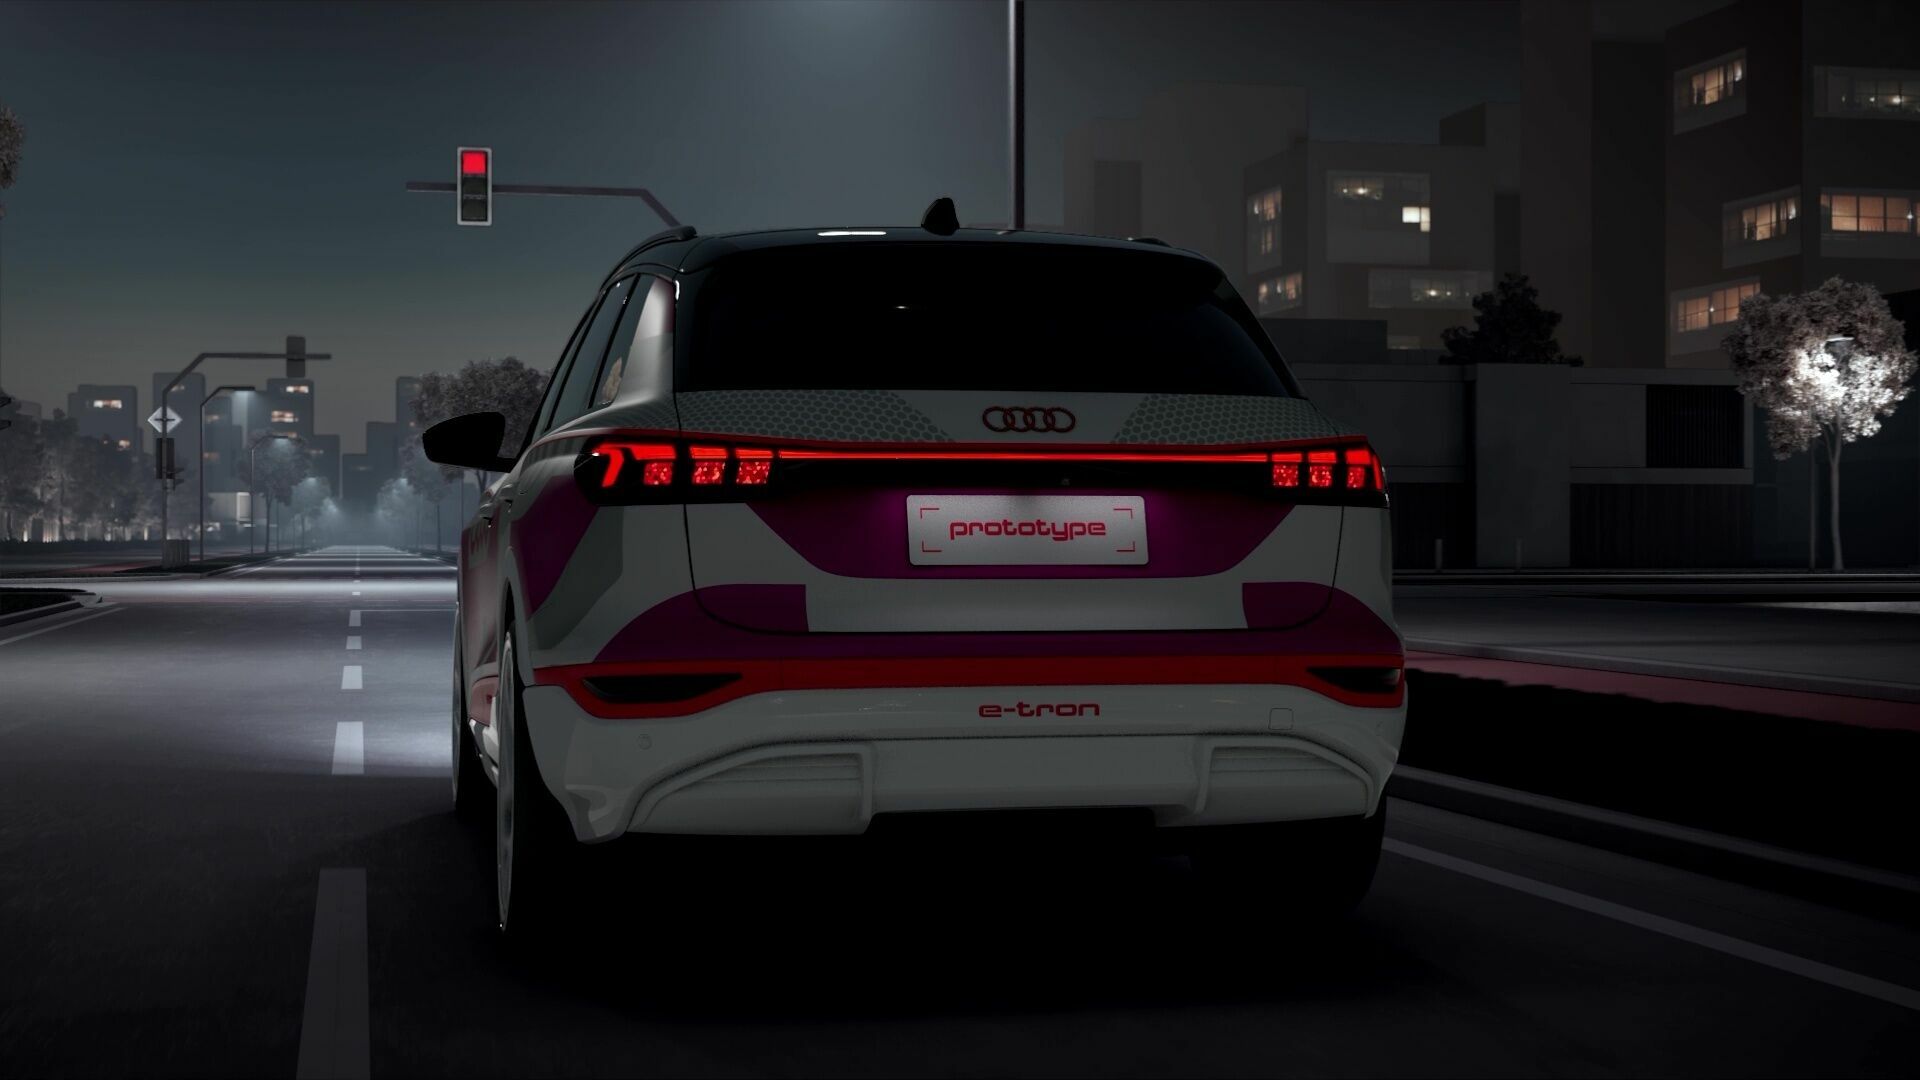 Intelligent and vibrant lighting: the Audi Q6 e-tron prototype with ...